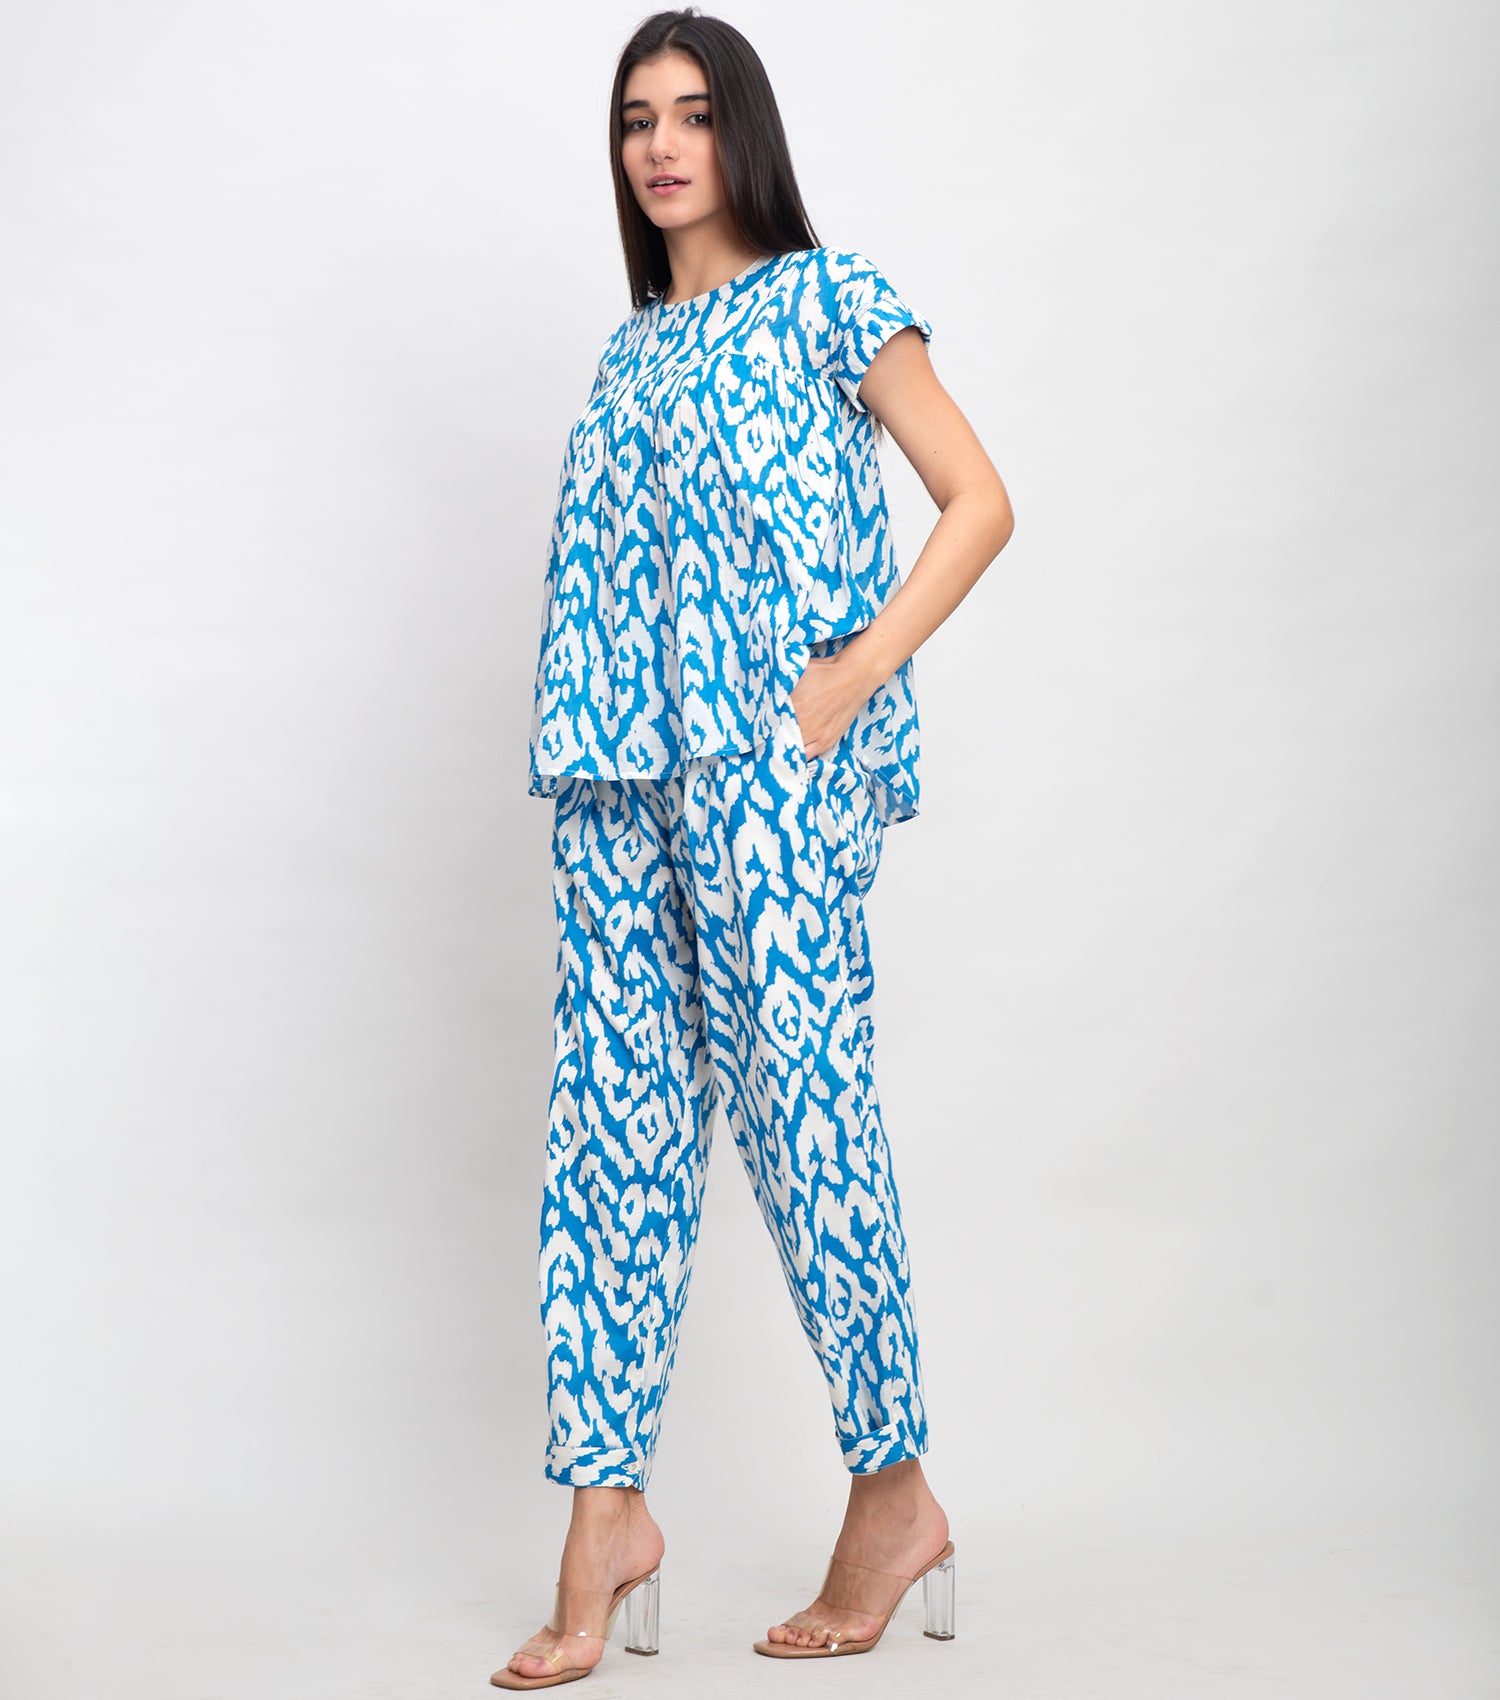 Sky Blue Cotton Elasticated Printed Pant with Adjustable Band At The Bottom